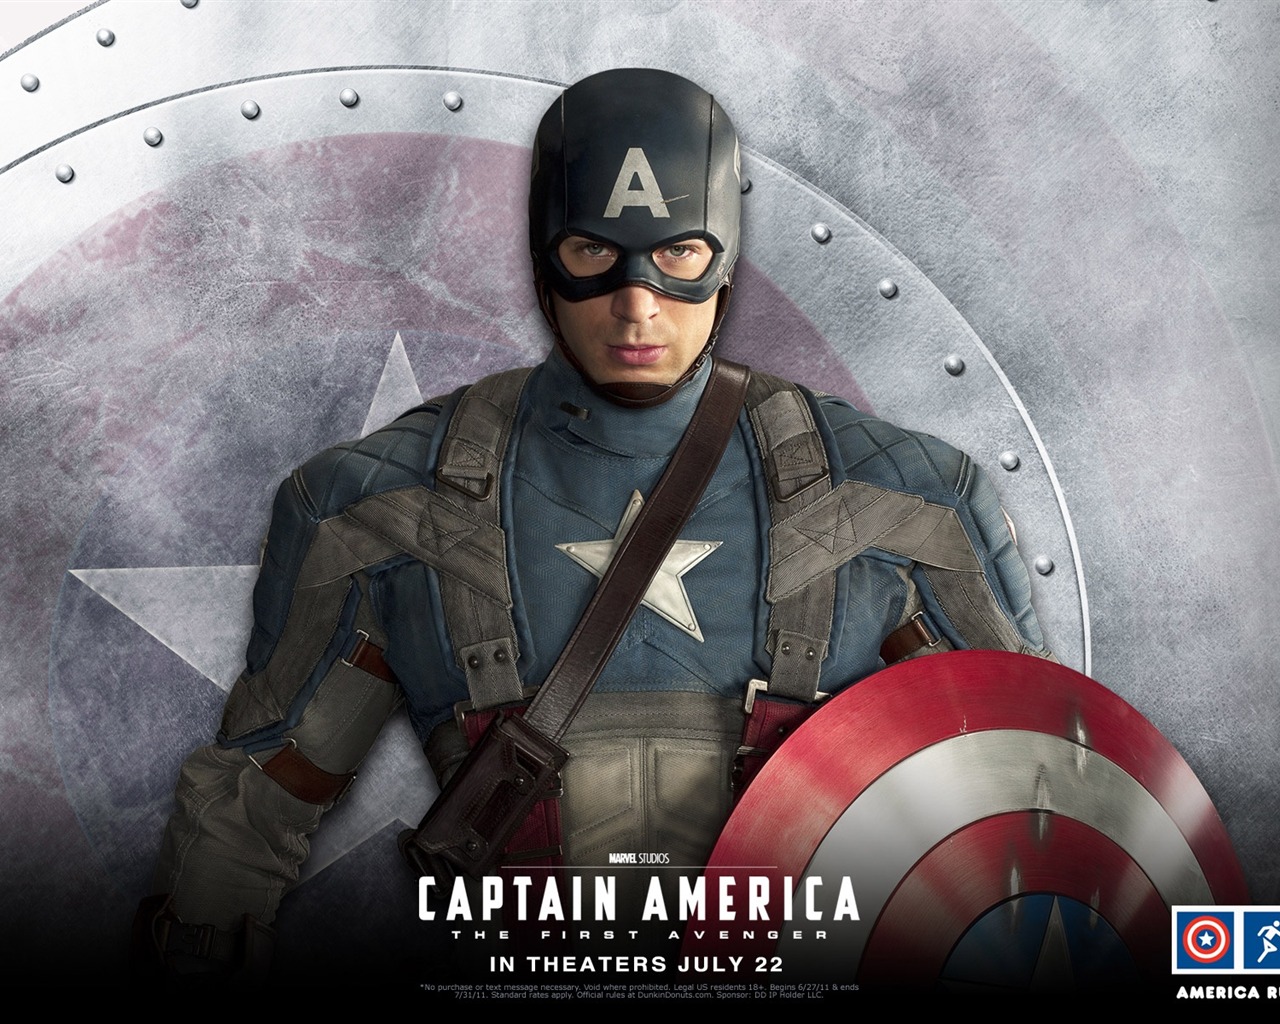 Captain America: The First Avenger wallpapers HD #4 - 1280x1024